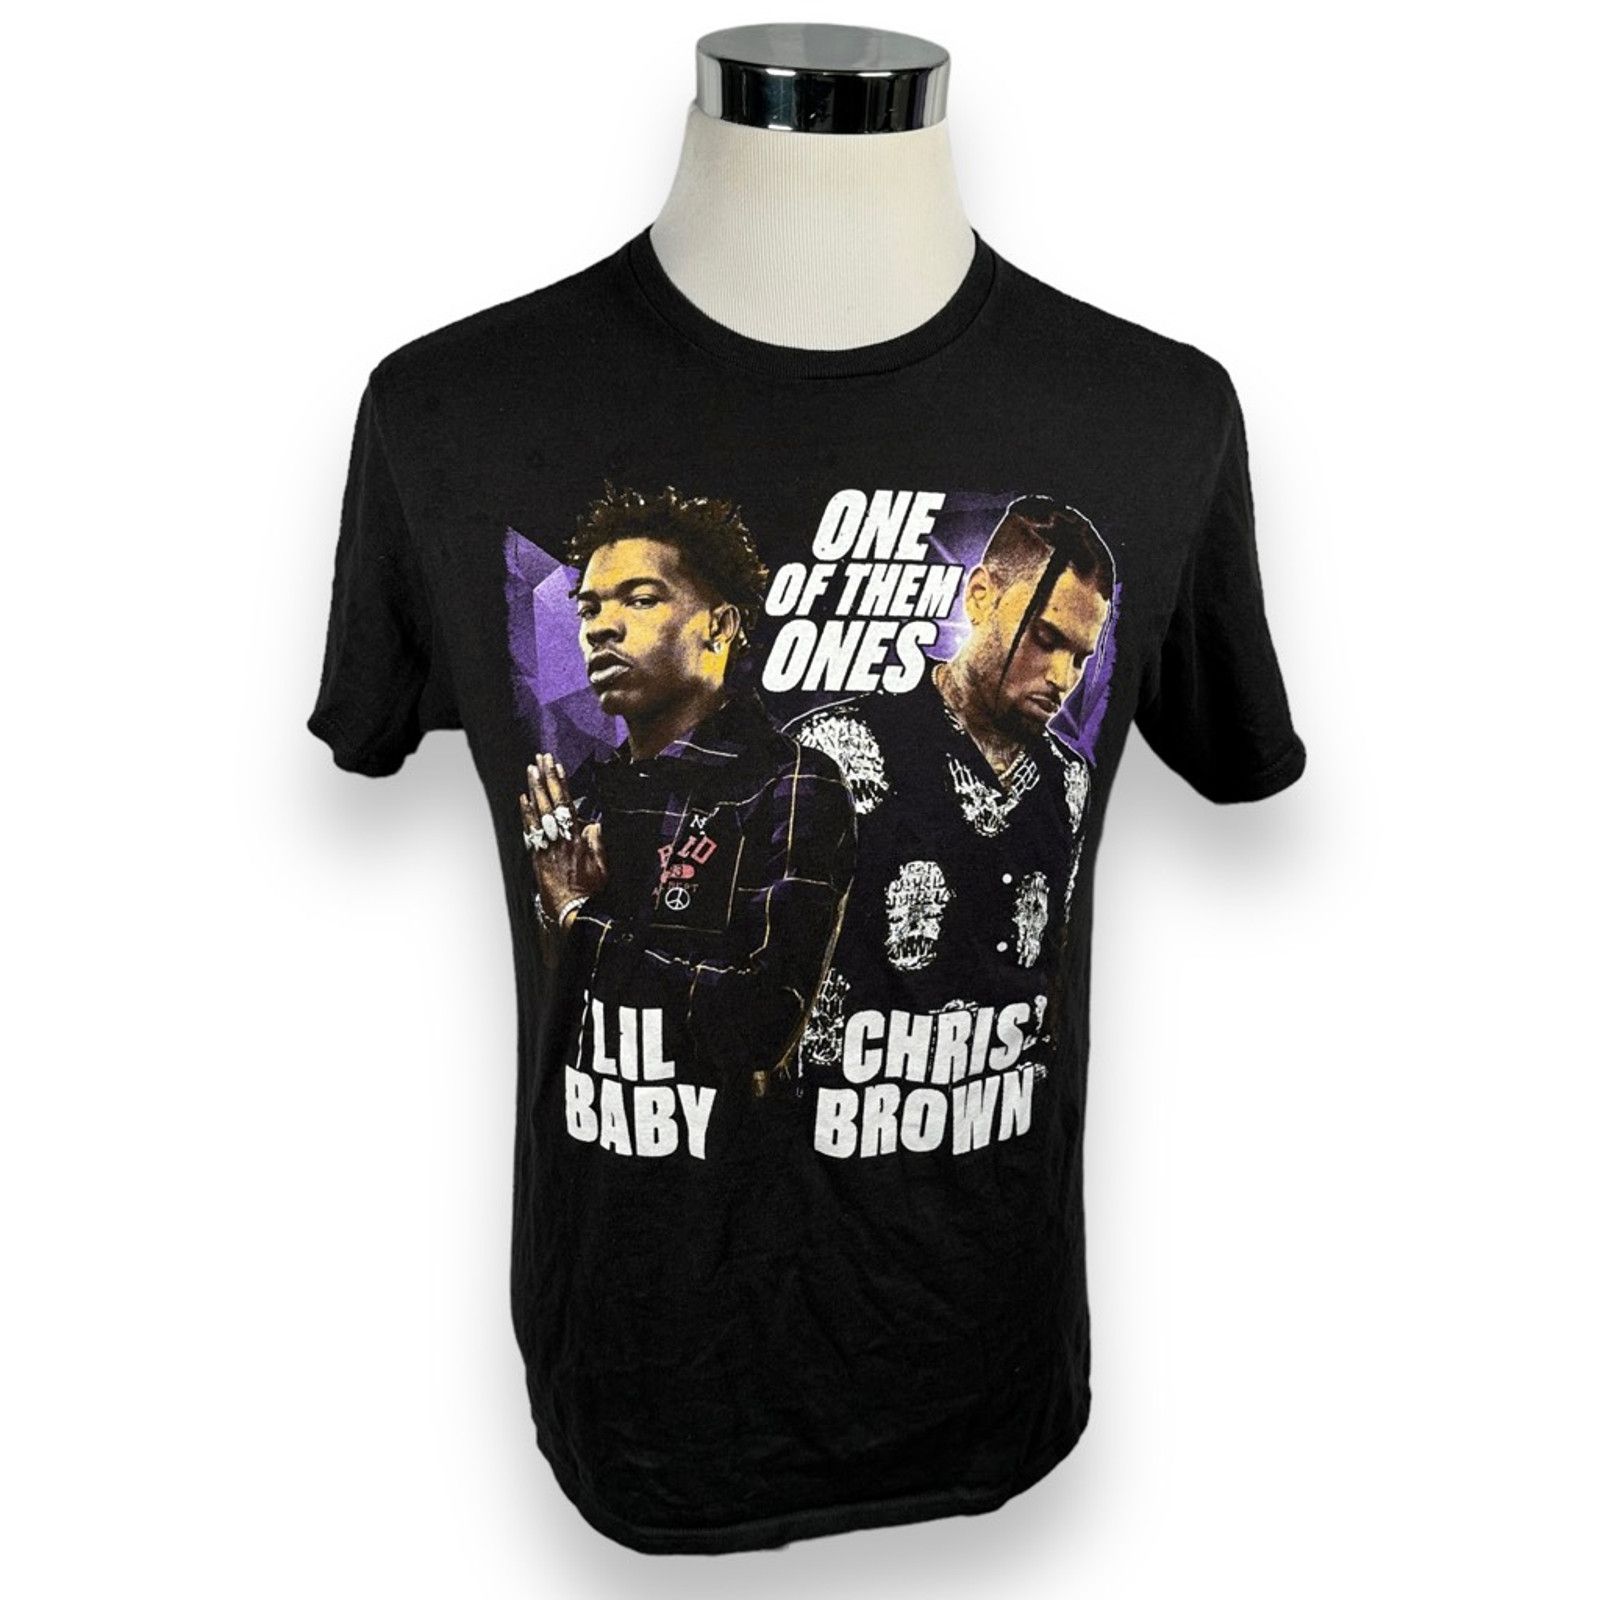 Delta Chris Brown Lil Baby Mens One Of Those Ones T-Shirt Black M Size US M / EU 48-50 / 2 - 1 Preview